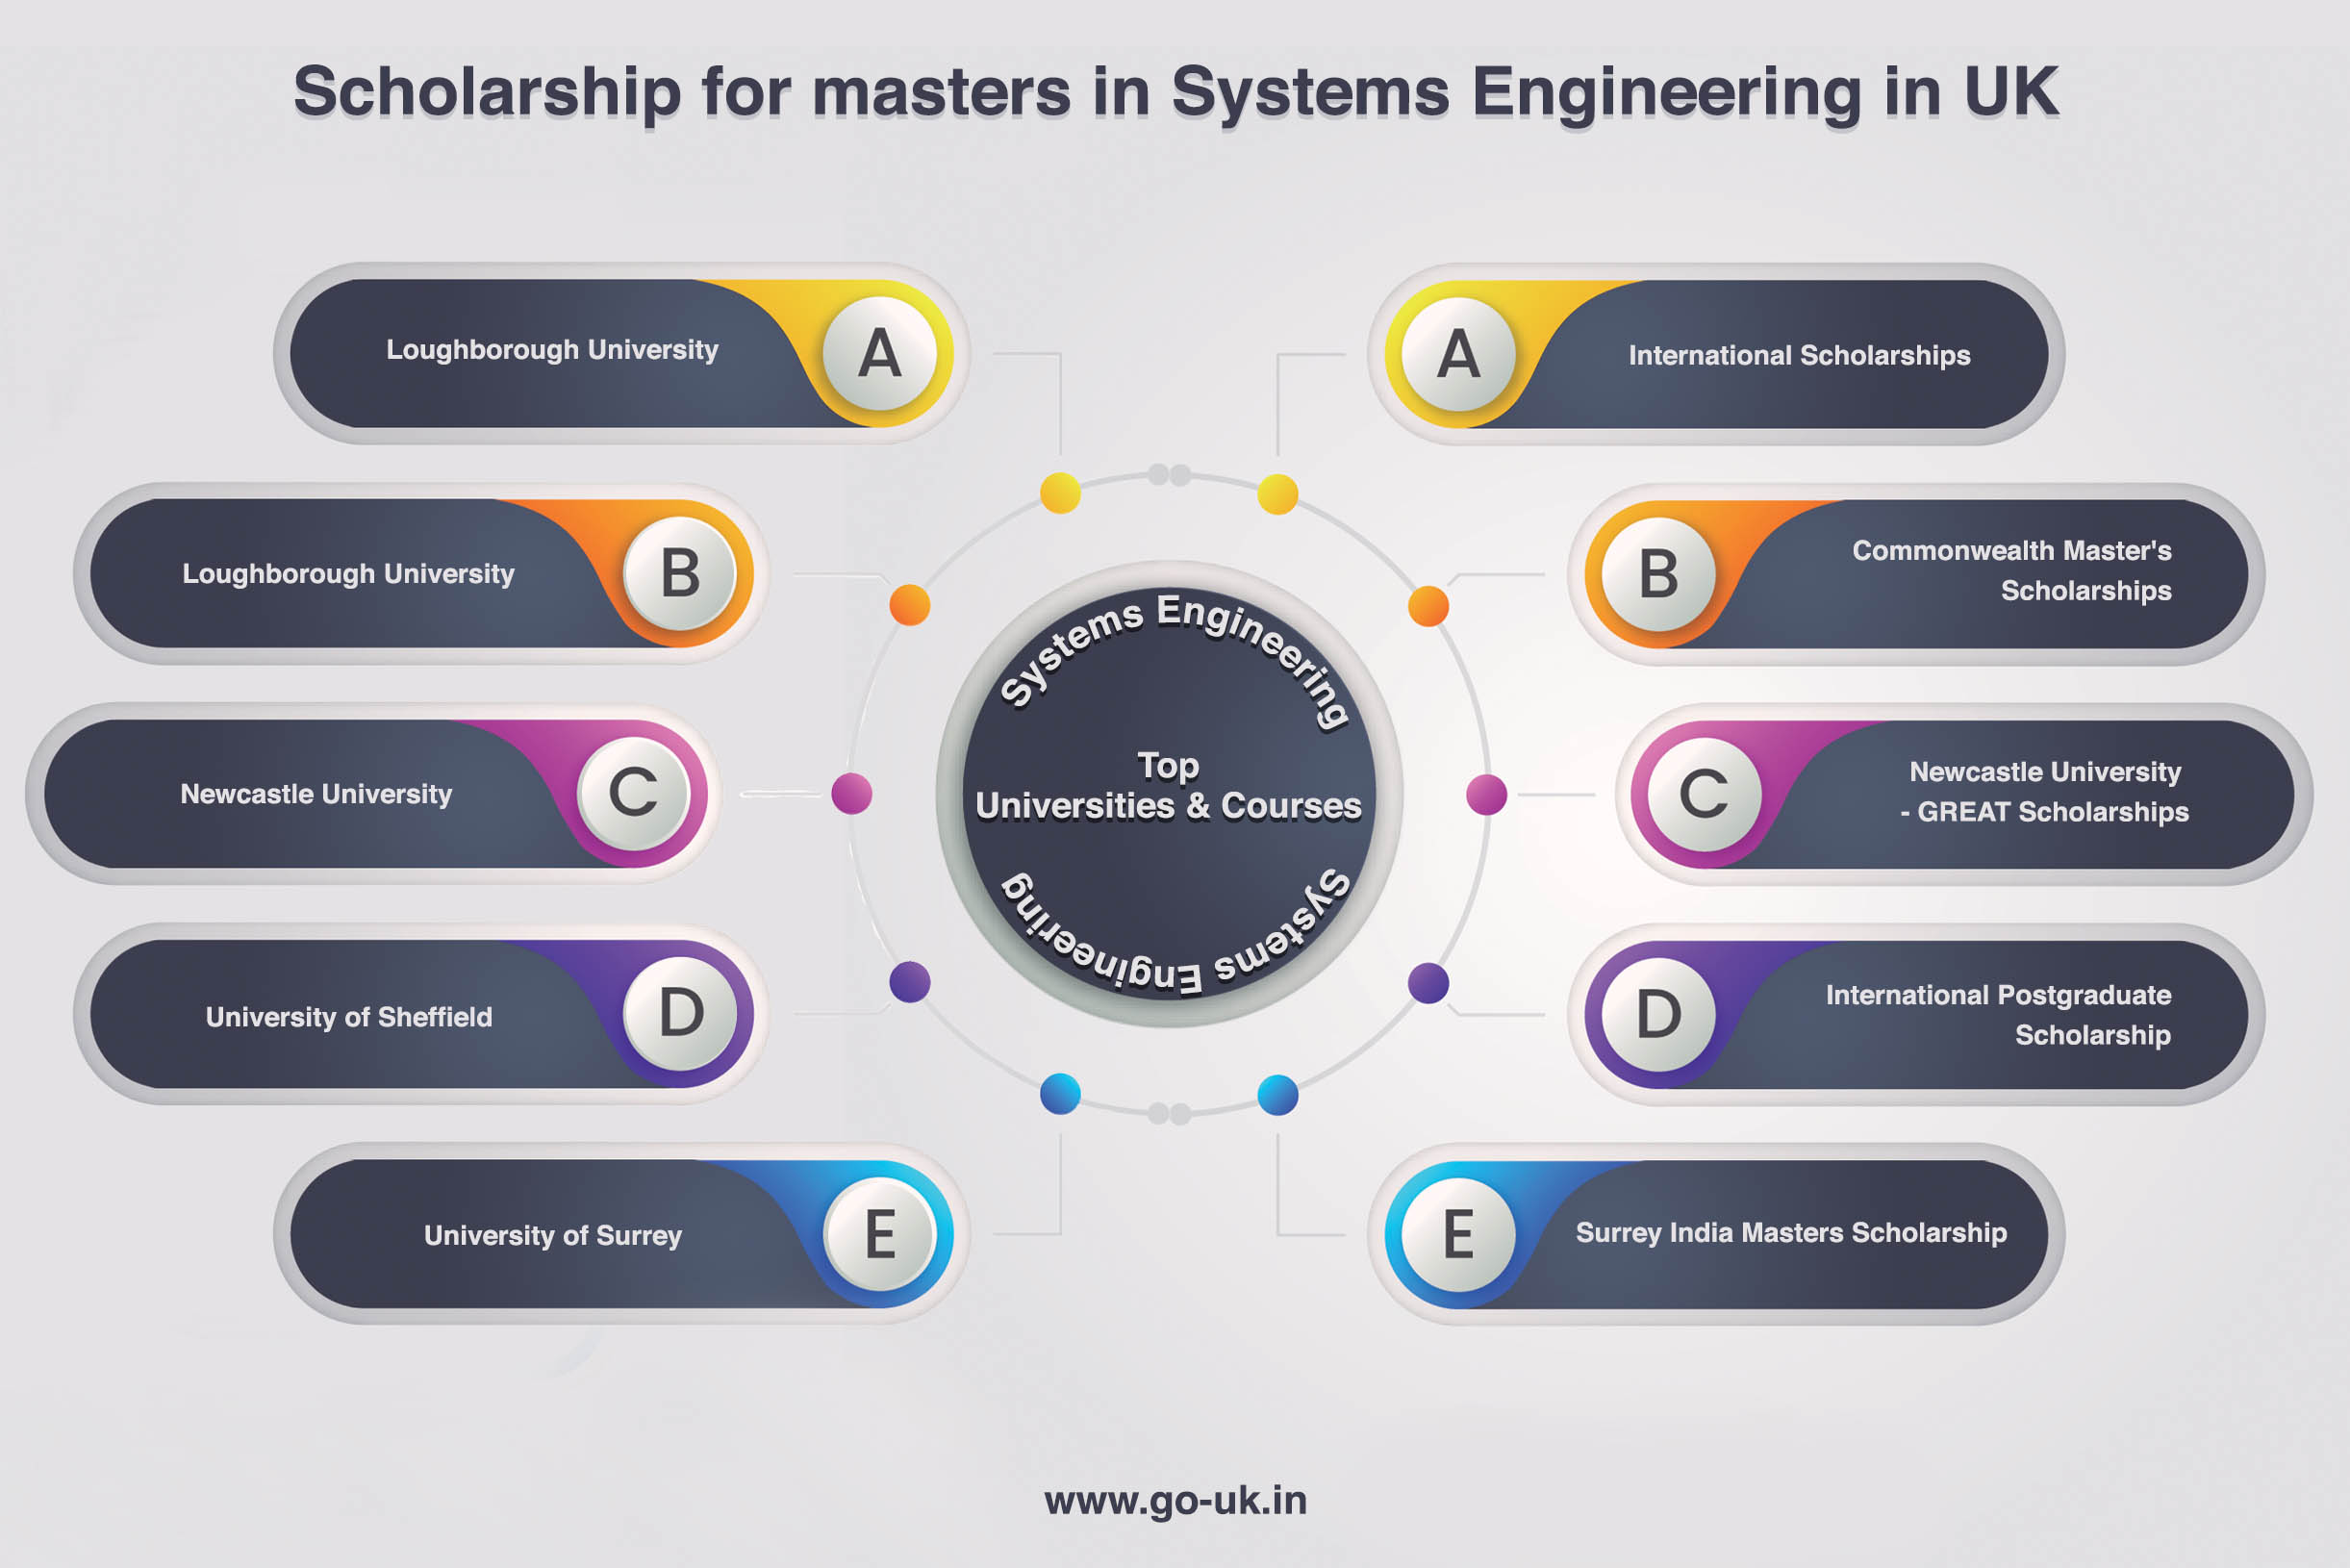 stof in de ogen gooien Herkenning shit Masters in Systems Engineering in UK | MSc in Systems Engineering in UK |  Study Systems Engineering in London for Indian Students | GoUK